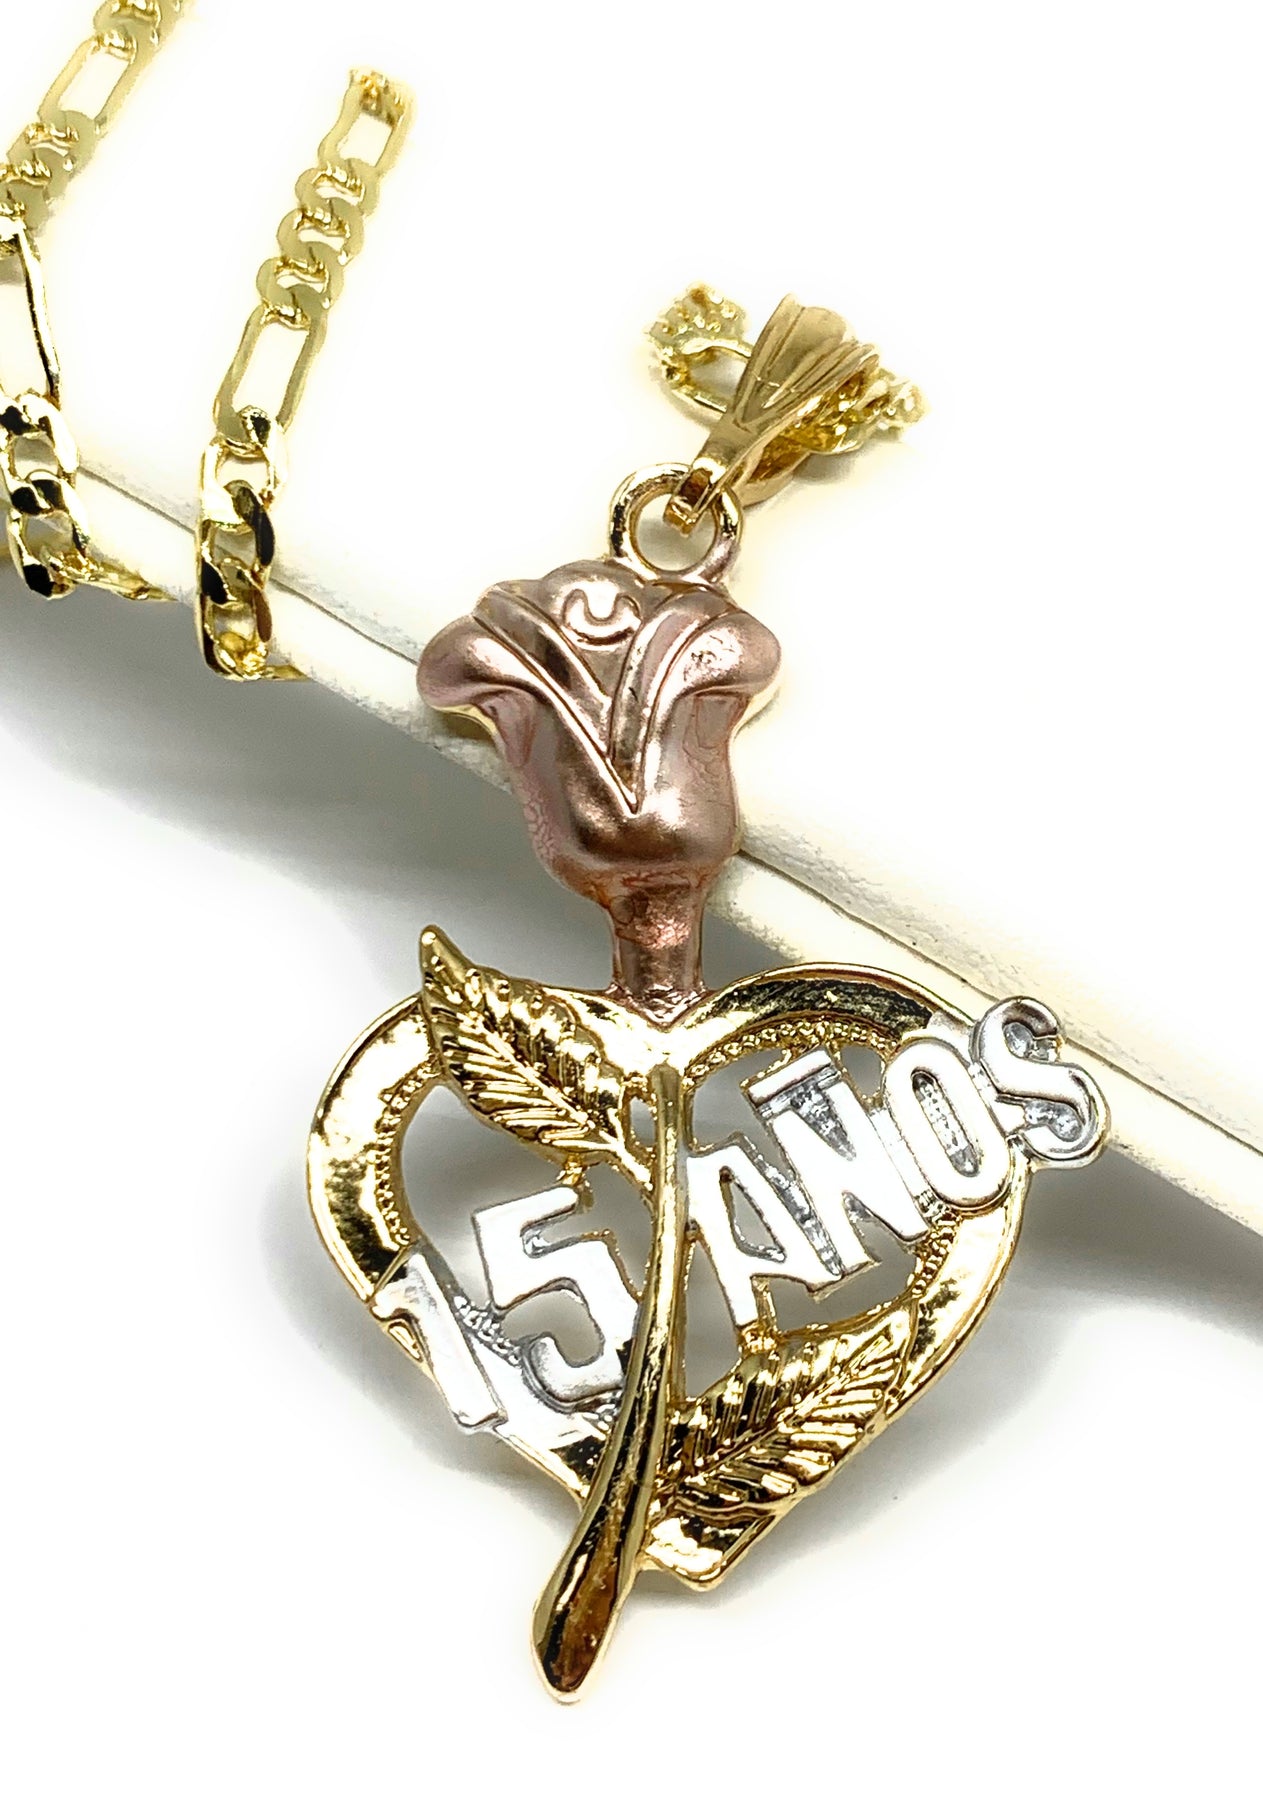 Tus Quince Años Quinceanera 18K Gold-Plated Heart-Shaped Pendant Necklace  Adorned With 15 Diamonds To Represent 15 Years And Comes With A Poem Card